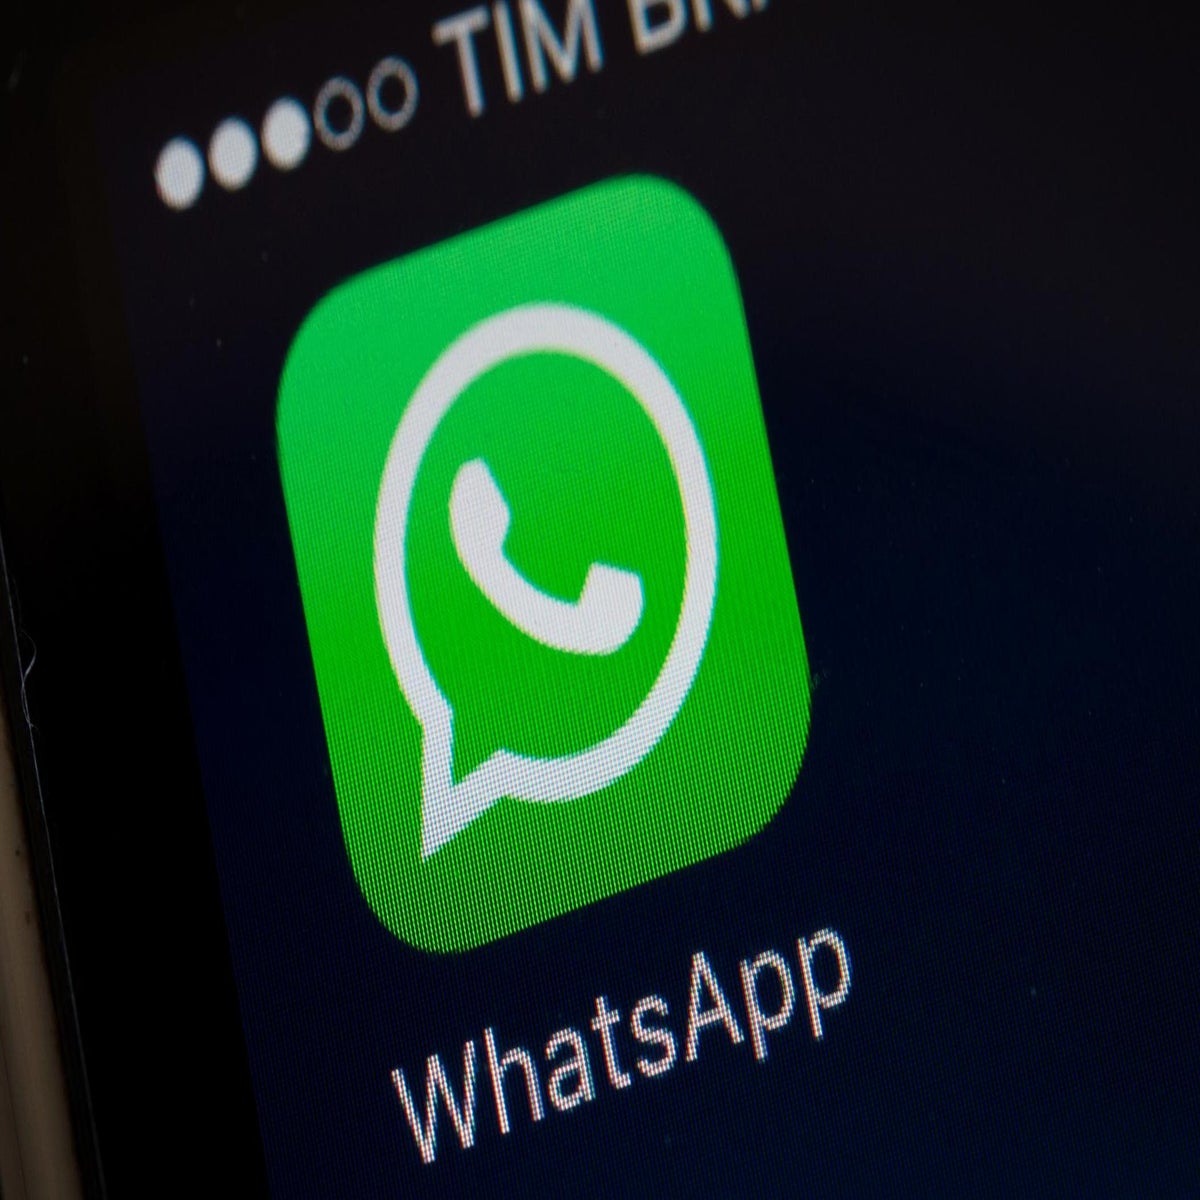 Indonesia will ban WhatsApp if obscene GIFs aren't removed